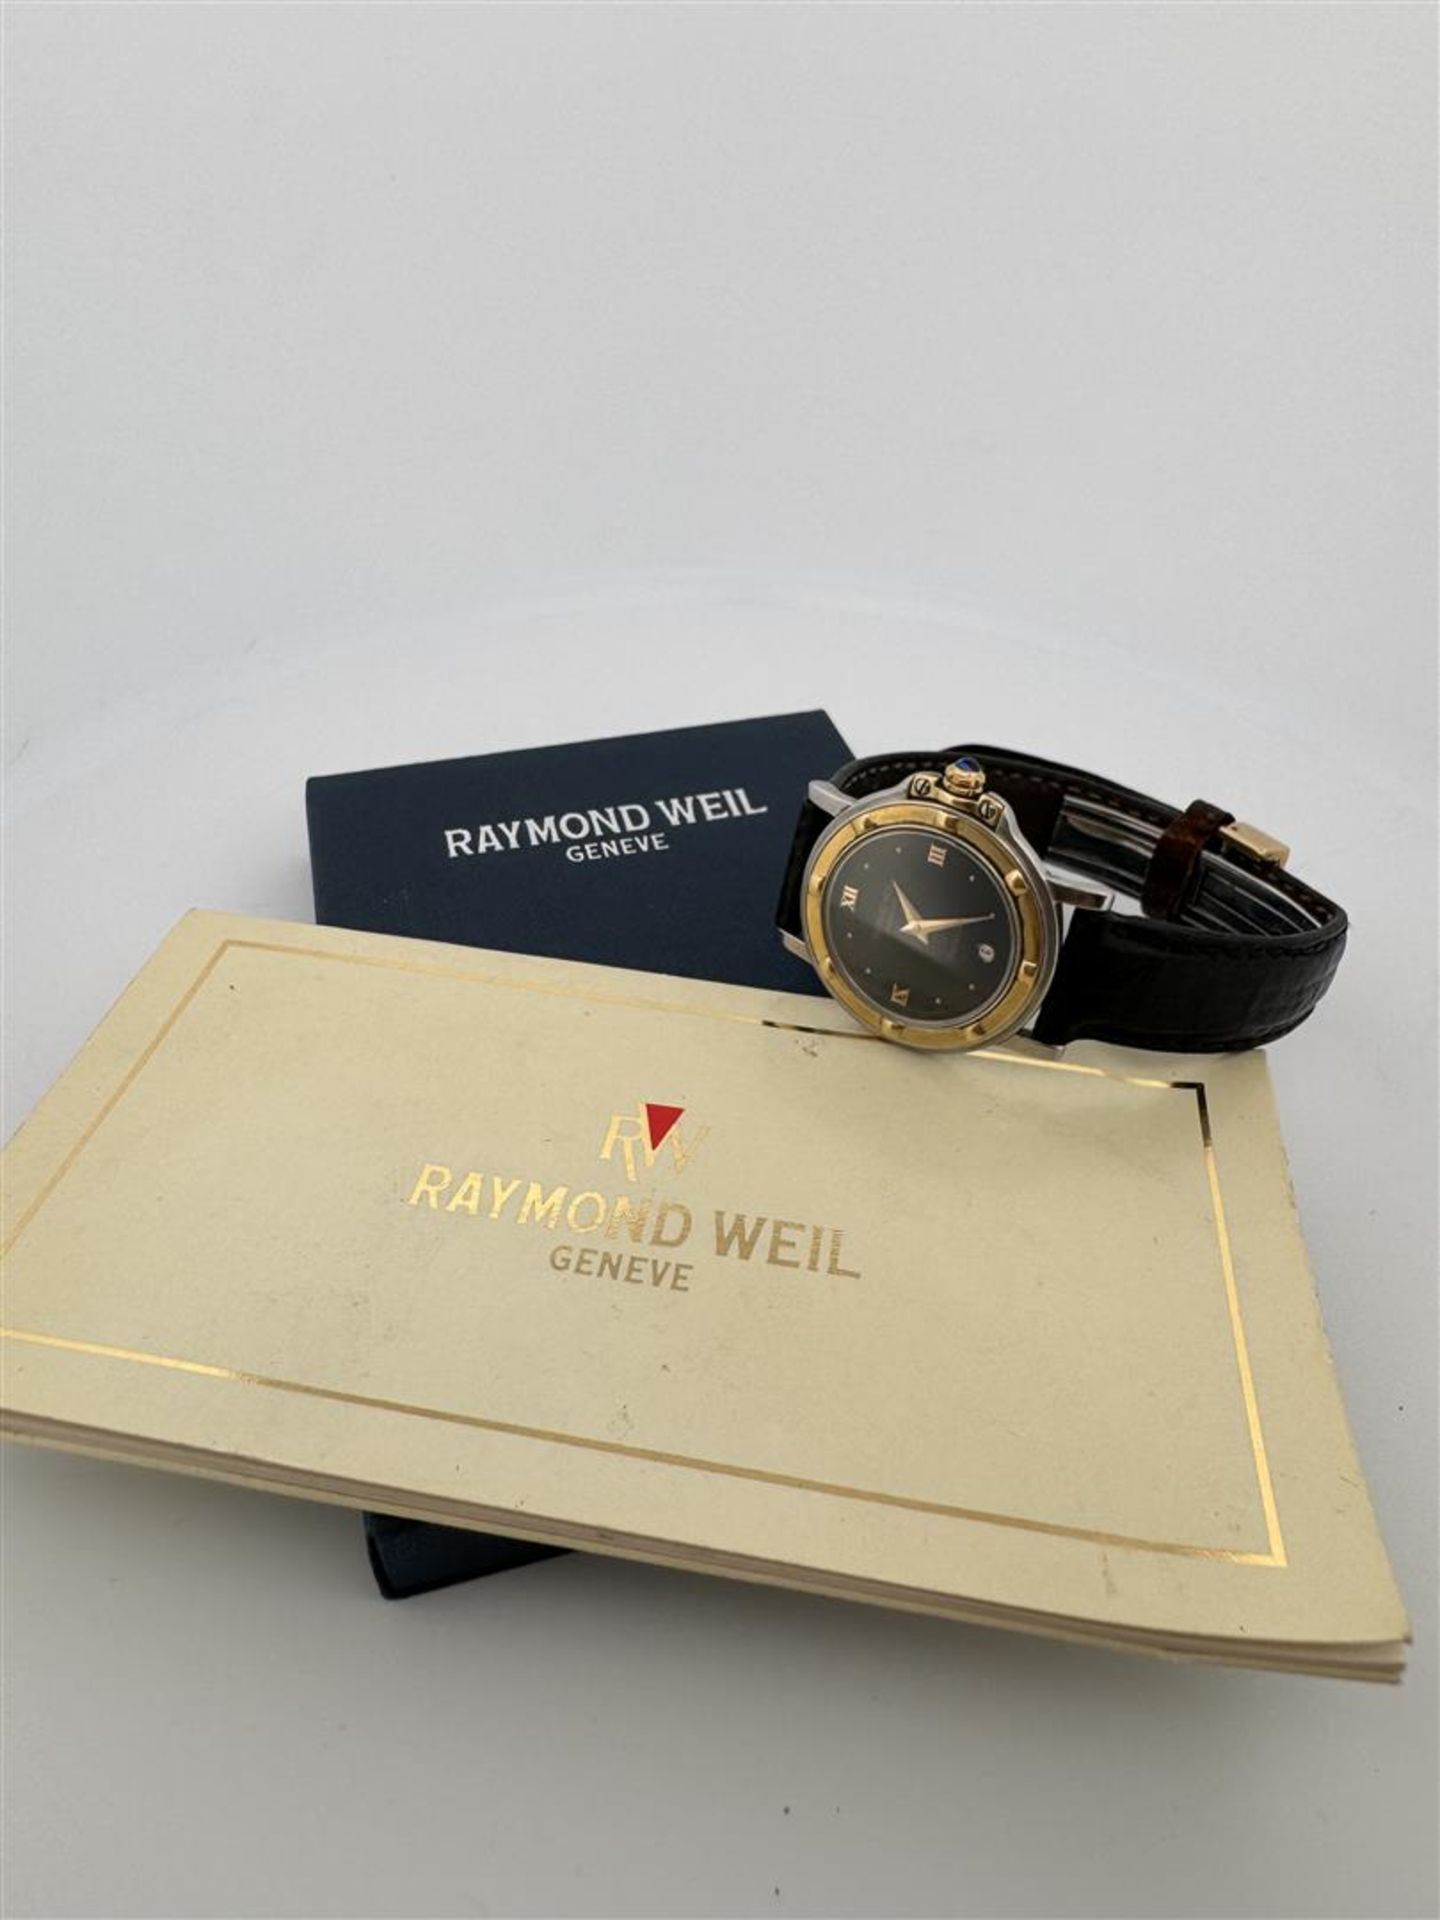 Raymond Weil ParsifalLadies watch.
18kt gold-plated crown and bezel, with beautiful blue sapphire on